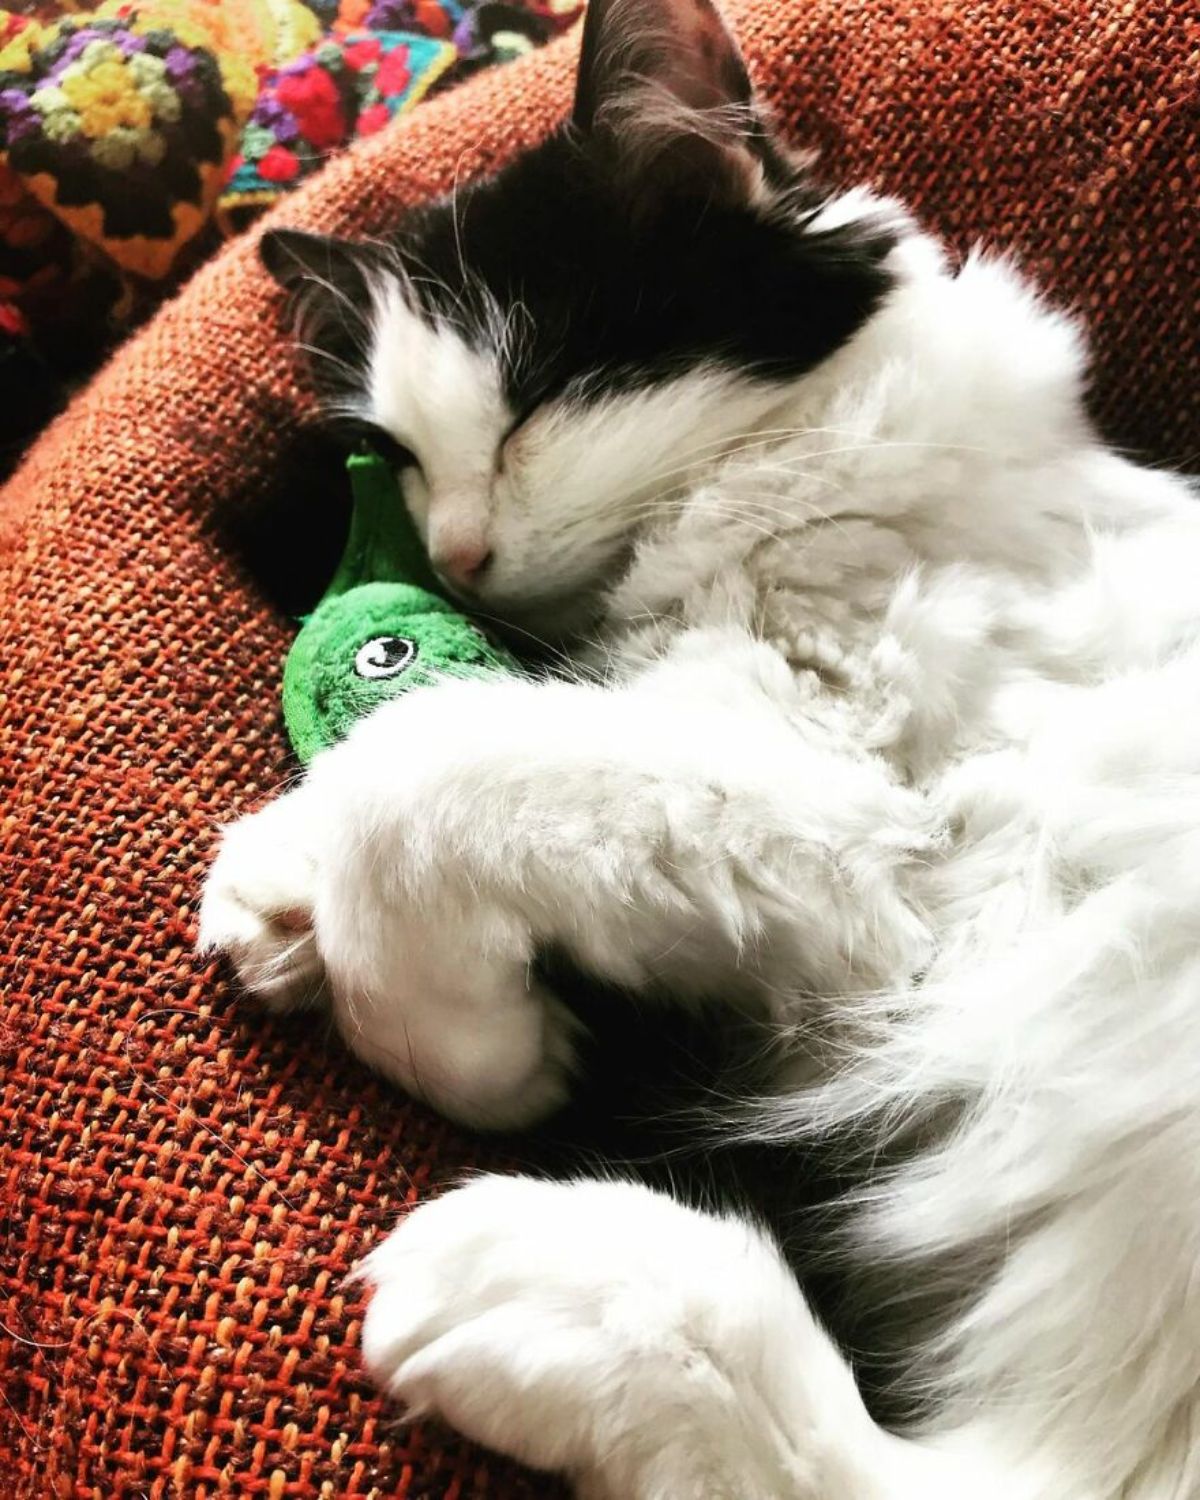 black and white fluffy cat cuddling with a green cucumber stuffed toy on an orange surface